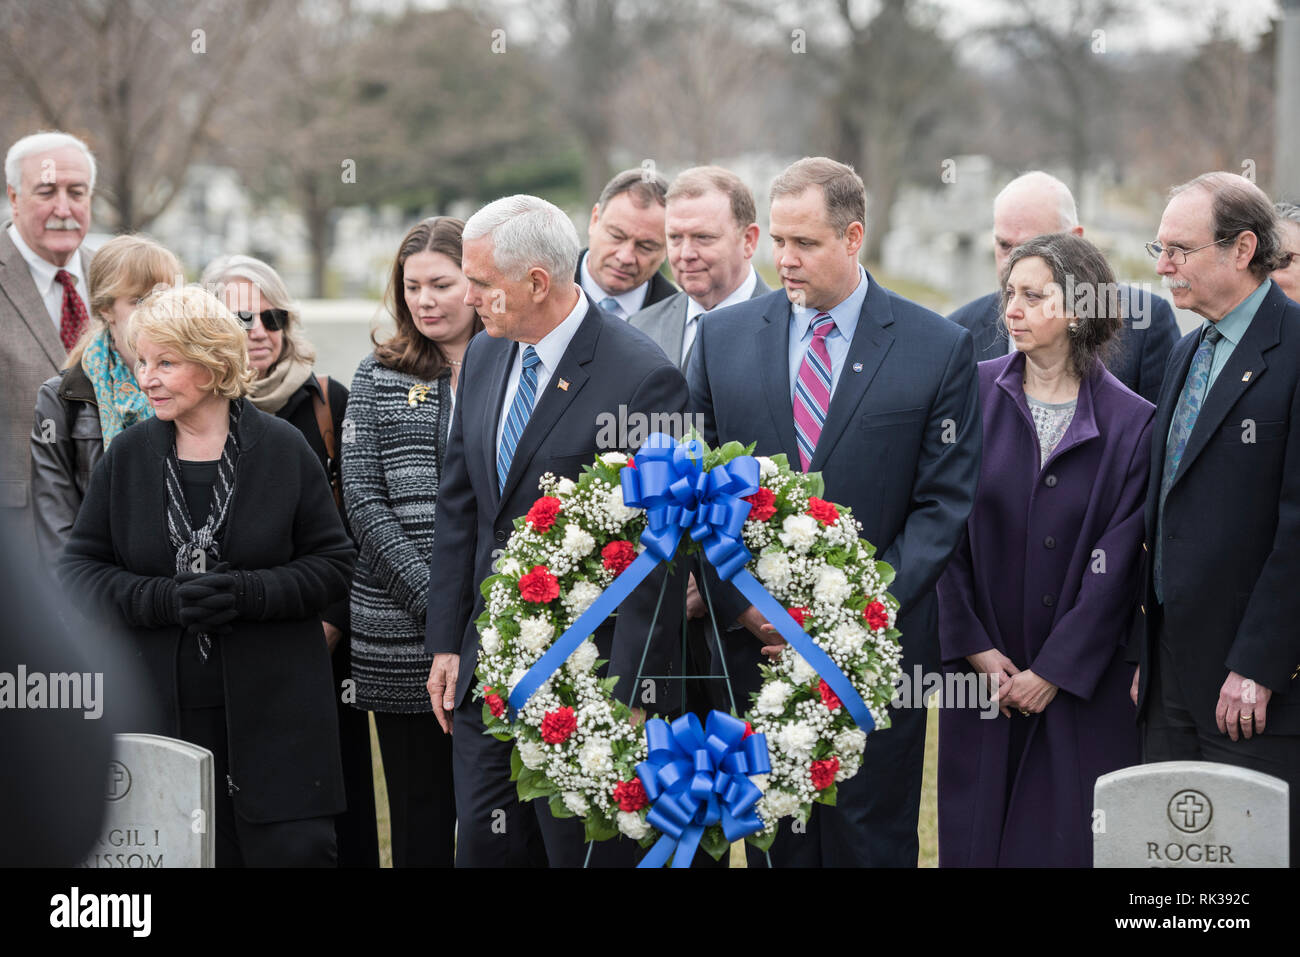 Vice President Mike Pence (center left) and NASA Administrator Jim Bridenstine (center right) participate in a wreath-laying ceremony at the graves of Apollo 1 crew members, U.S. Air Force Lt. Col. Virgil Grissom and U.S. Navy Lt. Cmdr. Roger Chaffee, during the NASA Day of Remembrance at Arlington National Cemetery, Arlington, Virginia, Feb. 7, 2019. Also present for the wreath-laying were family and friends of those who died in the Challenger and Columbia accidents, as well as several astronauts and former NASA Administrators. This annual event pays tribute “to the crews of Apollo 1 and spac Stock Photo